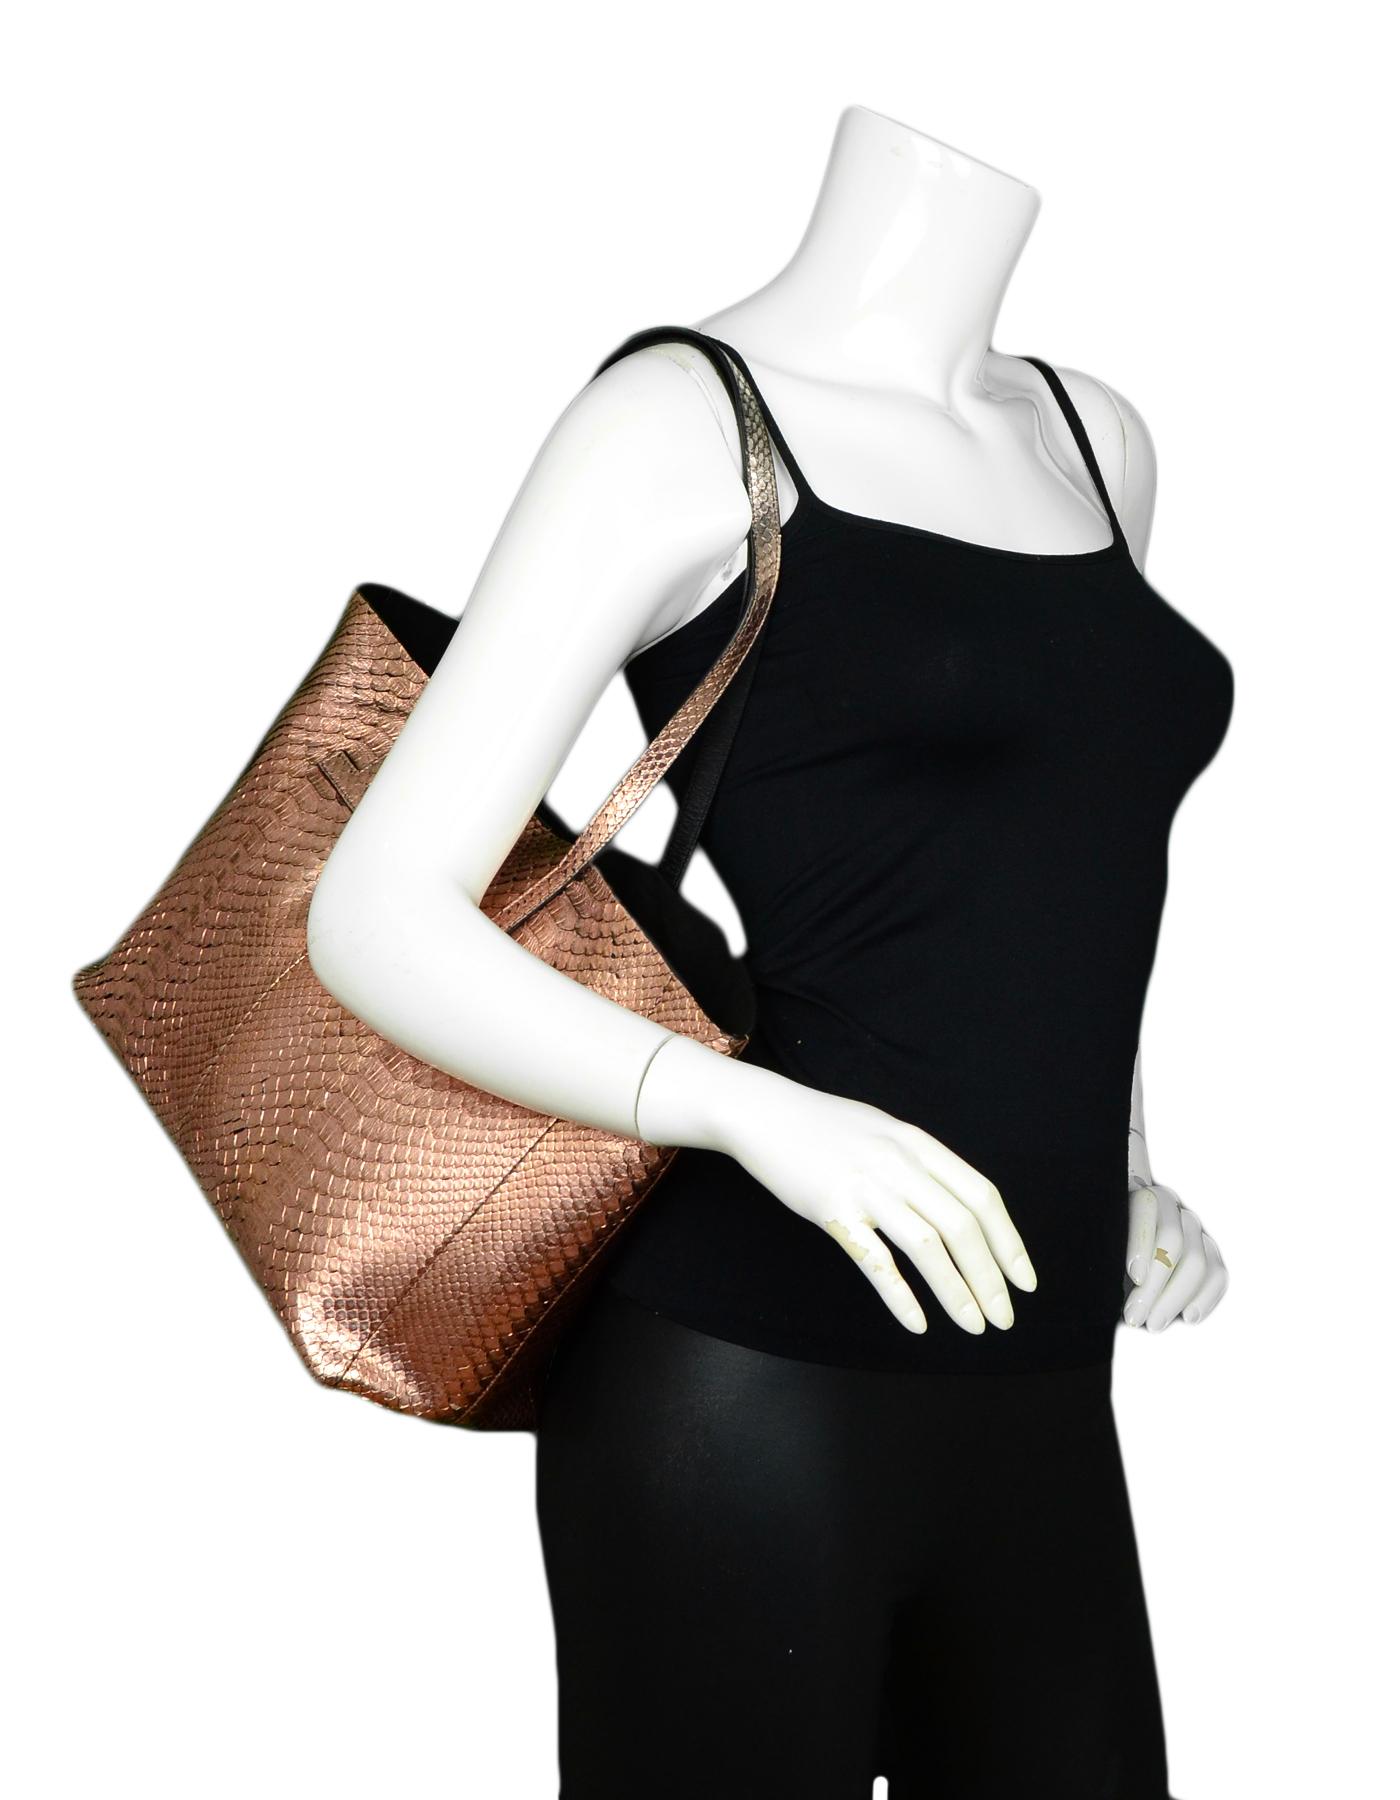 Tom Ford Rose Gold Python Small T Tote Bag

Made In: Italy
Color: Gold
Hardware: Silvertone 
Materials: Python, Rosegold
Lining: Suede
Closure/Opening: Open top
Exterior Pockets: None
Interior Pockets: One zip pocket
Exterior Condition: Excellent